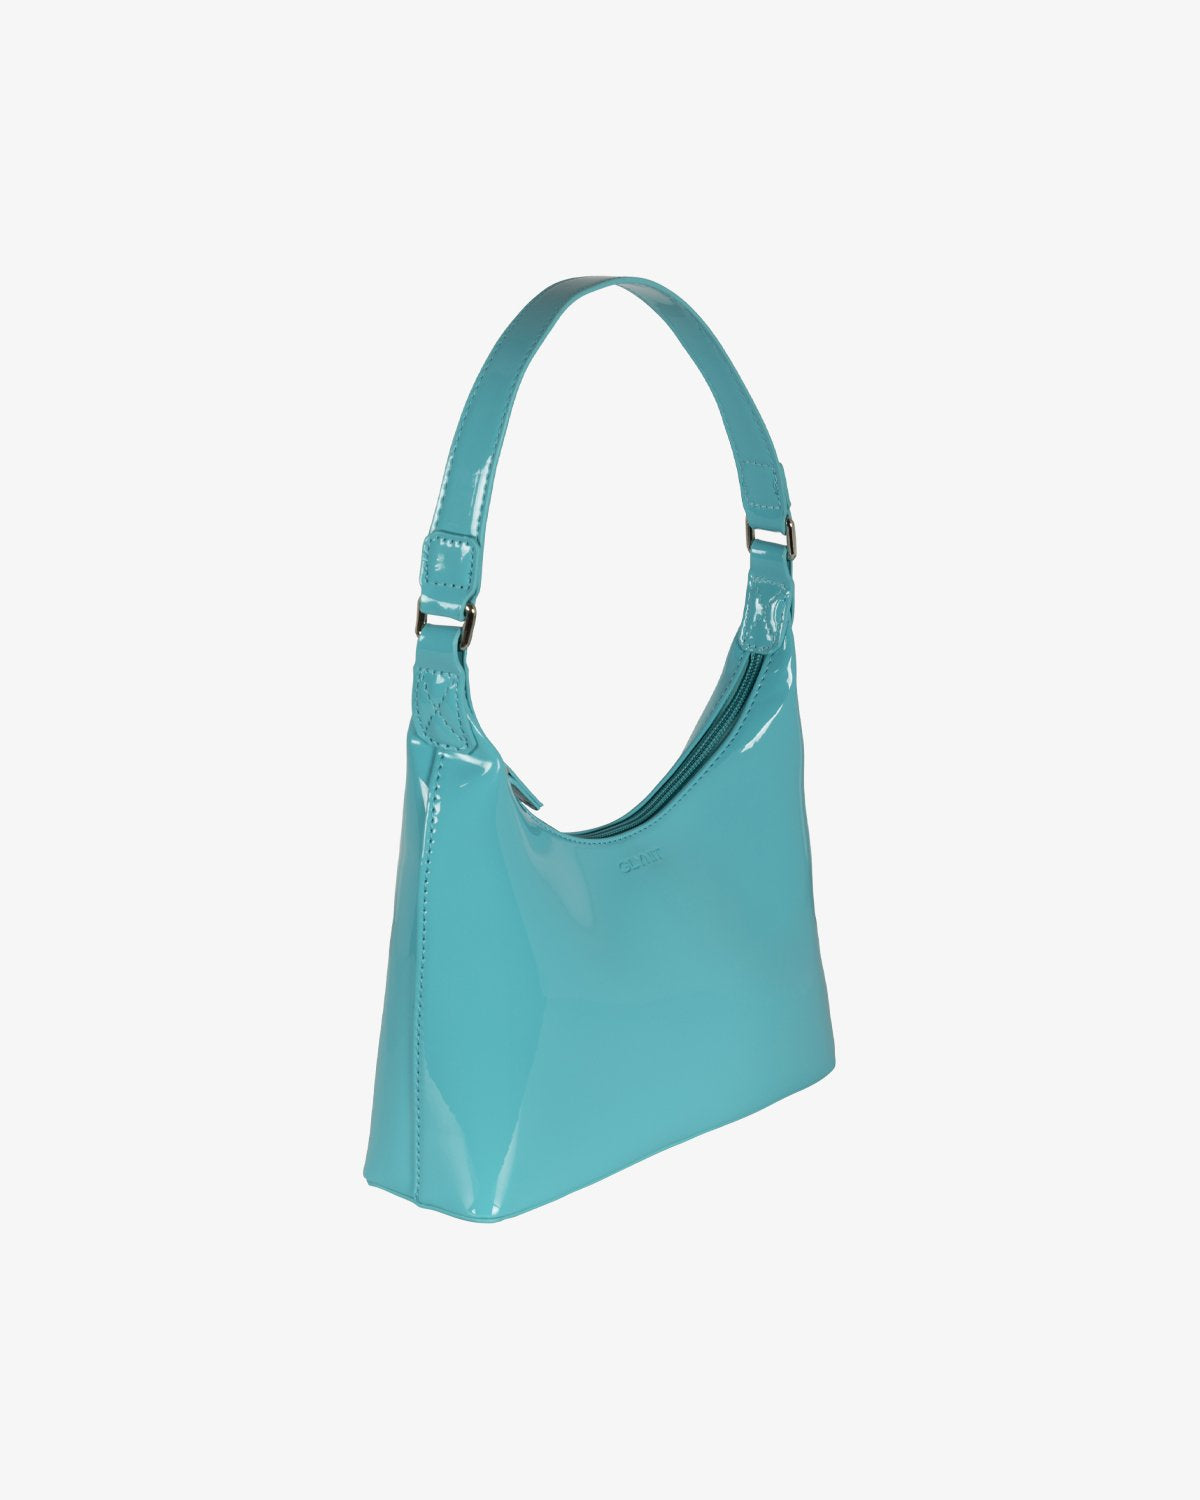 THE MOLLY BAG - AQUA BLUE - EXCLUSIVE Bags from GLYNIT - Just $69.00! SHOP NOW AT IAMINHATELOVE BOTH IN STORE FOR CYPRUS AND ONLINE WORLDWIDE